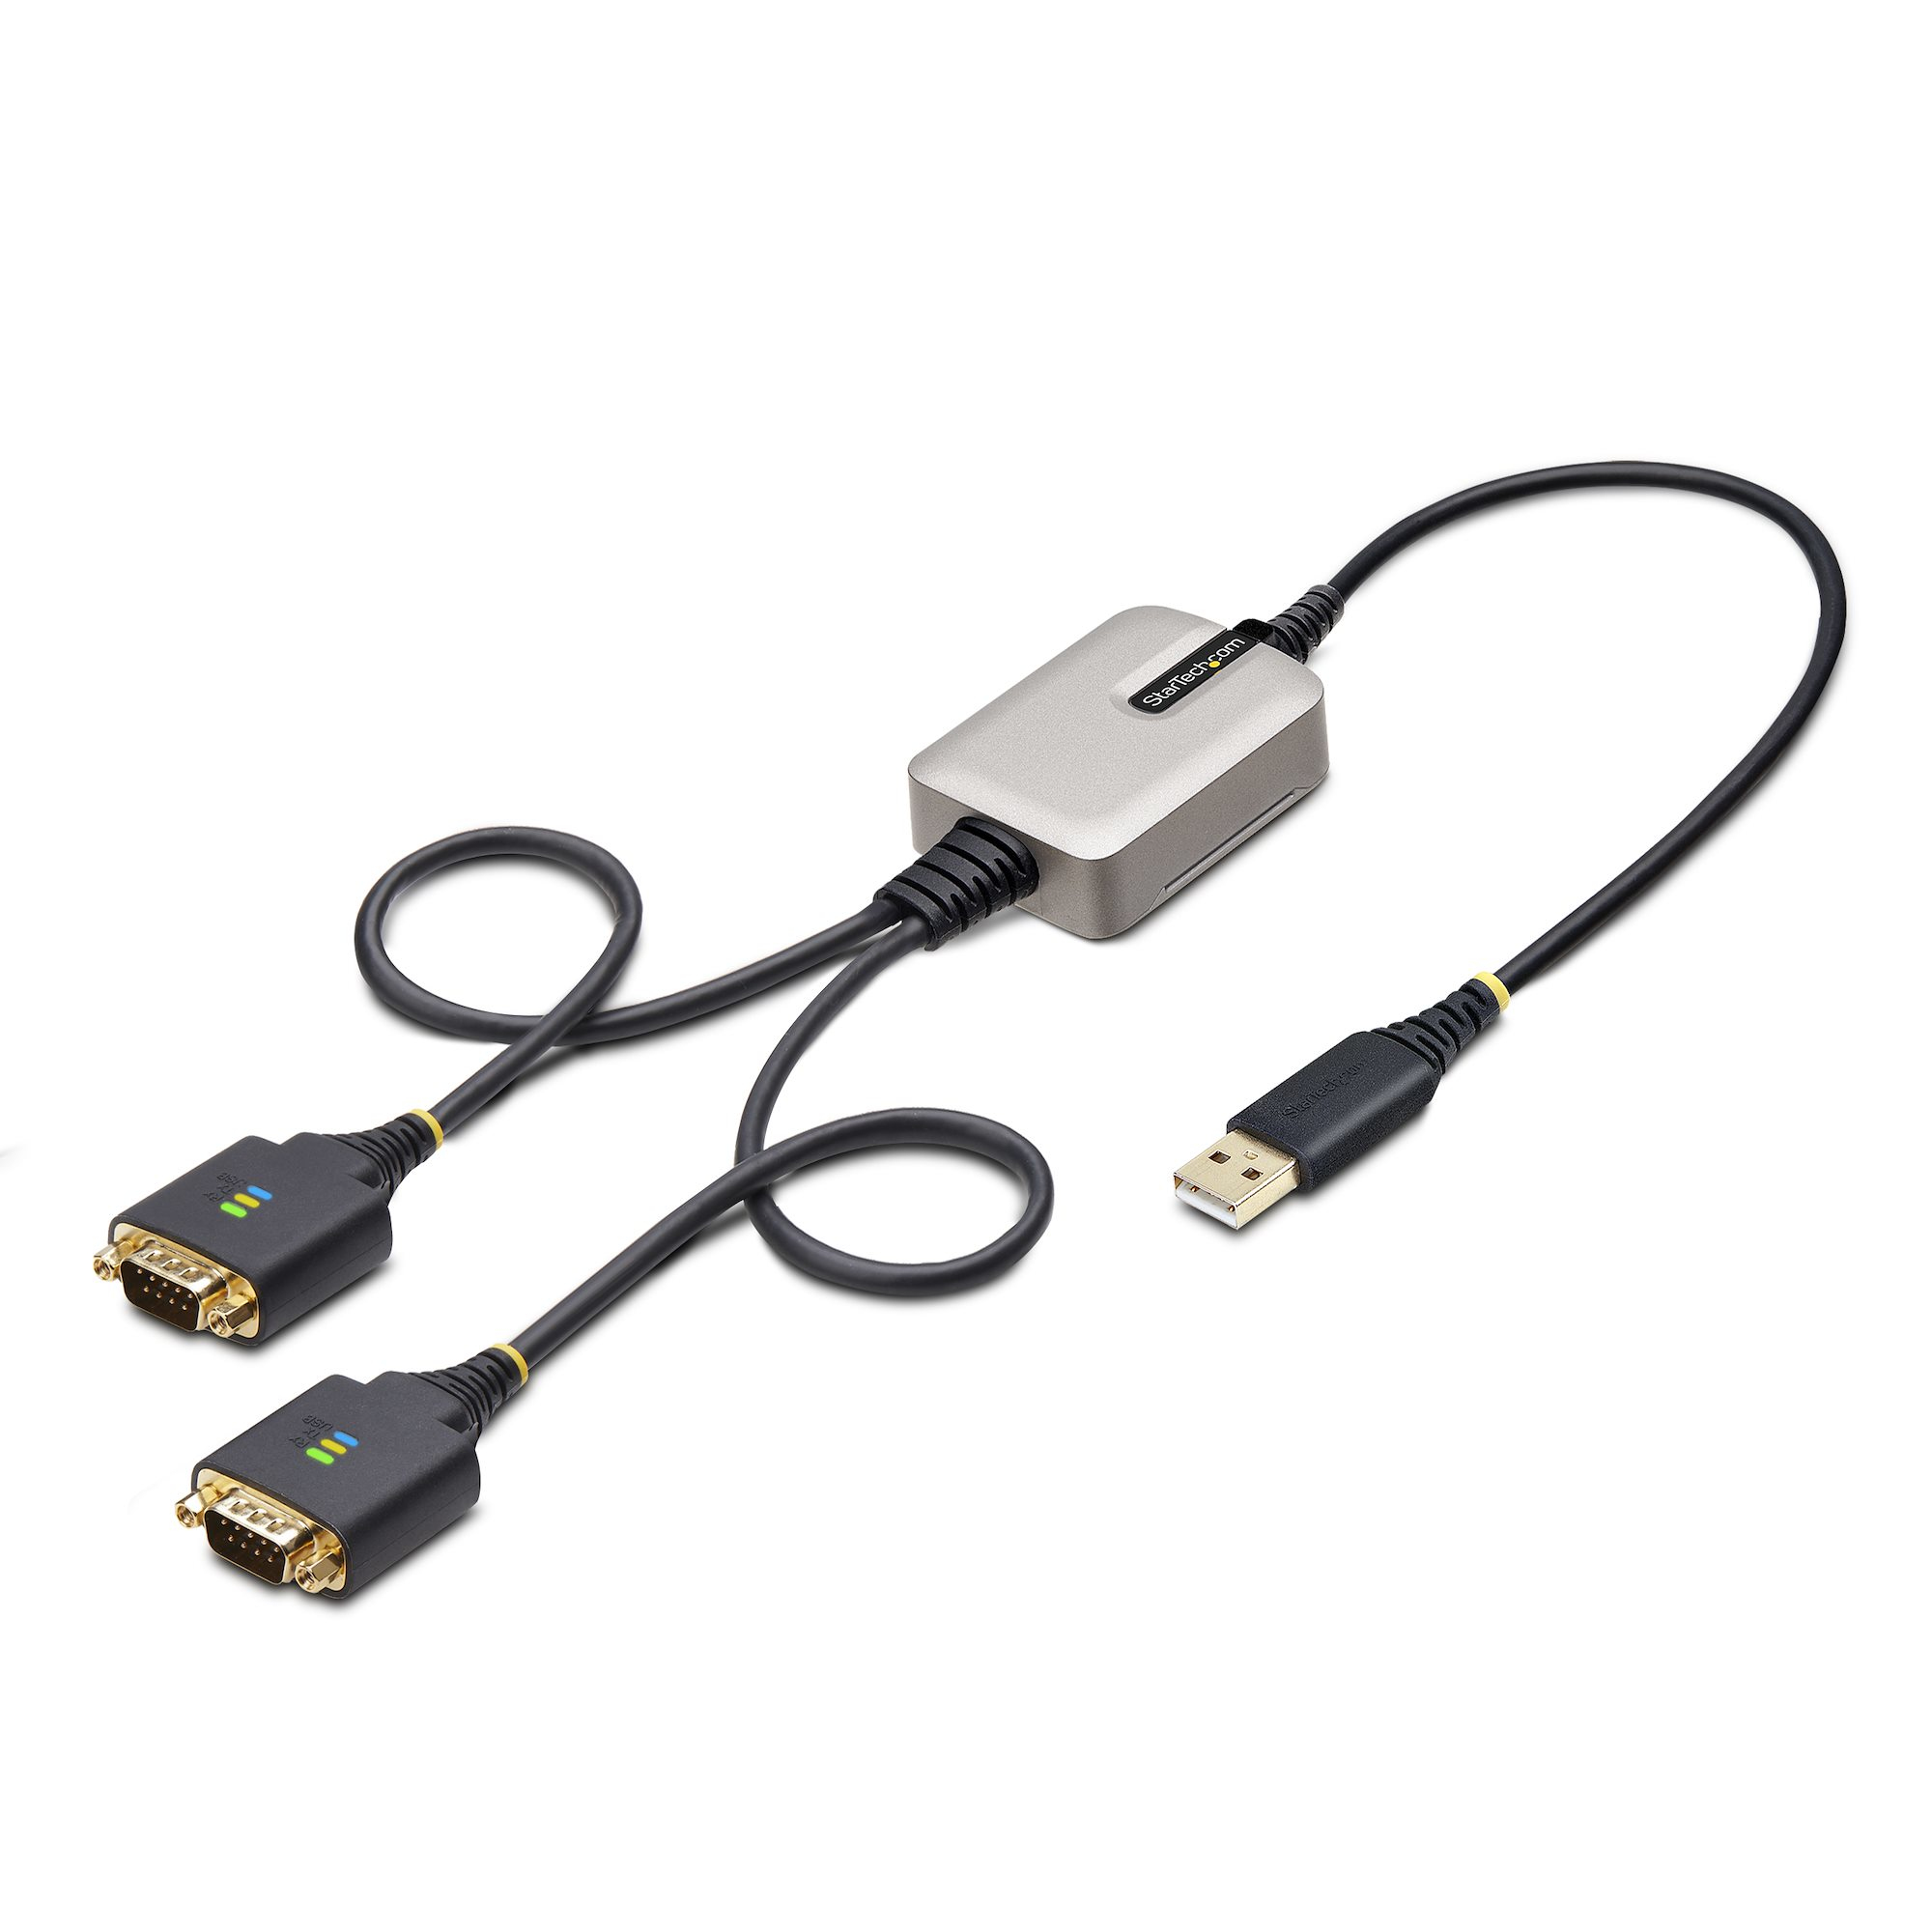 Photos - Cable (video, audio, USB) Startech.com 2ft  2-Port USB to Serial Adapter Cable, Interchang 2P1 (60cm)